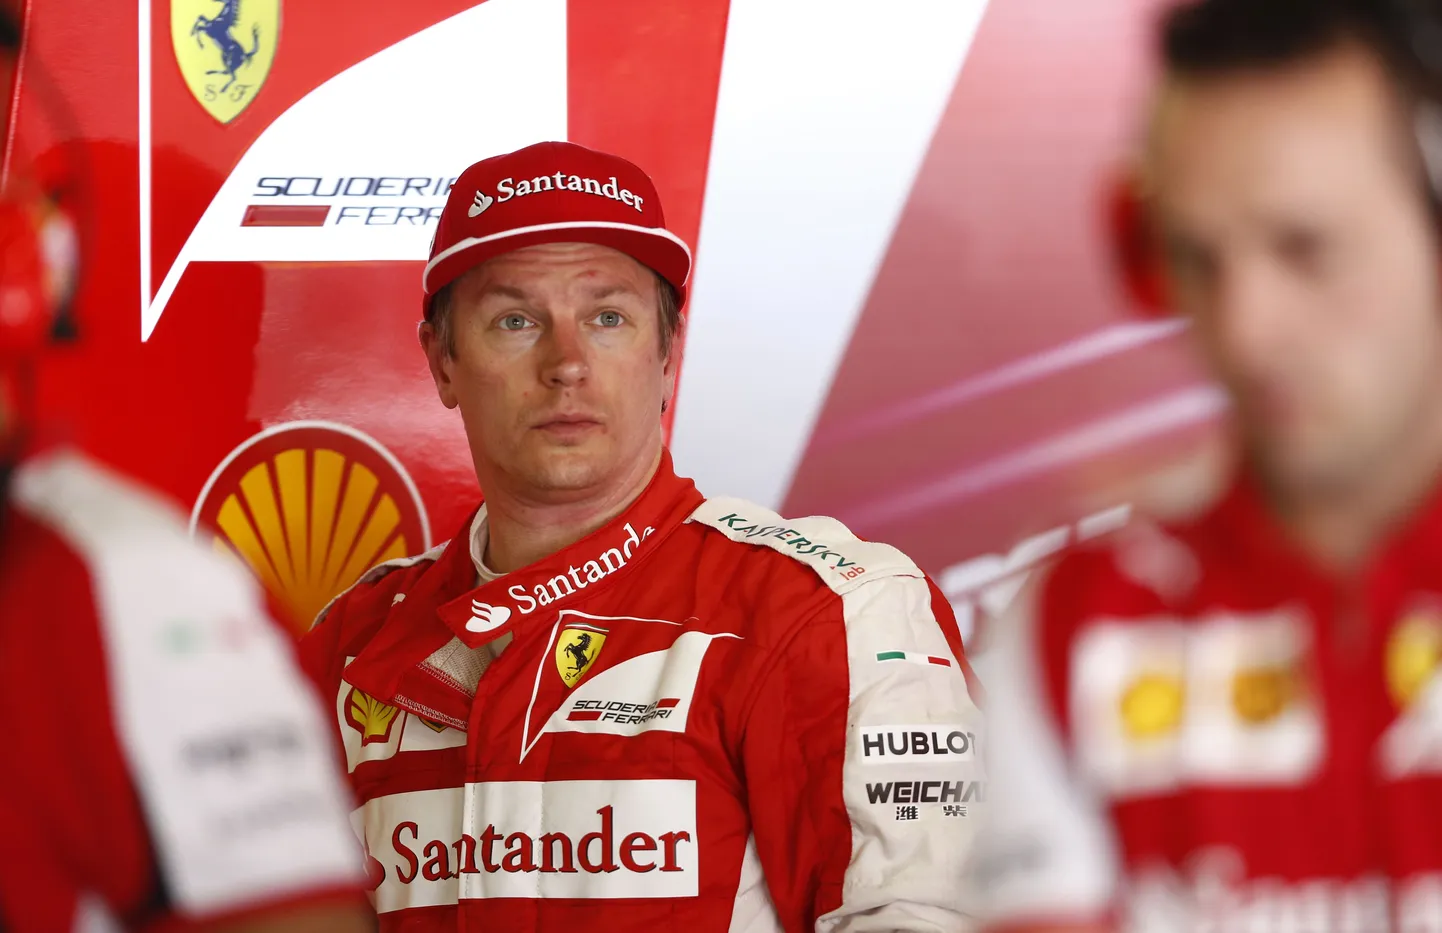 Ferrari driver Kimi Raikkonen of Finland stands inside his box at the end of the second session for the Spain Formula One Grand Prix at the Barcelona Catalunya racetrack in Montmelo, just outside Barcelona, Spain, Friday, May 8, 2015. (AP Photo/Manu Fernandez)